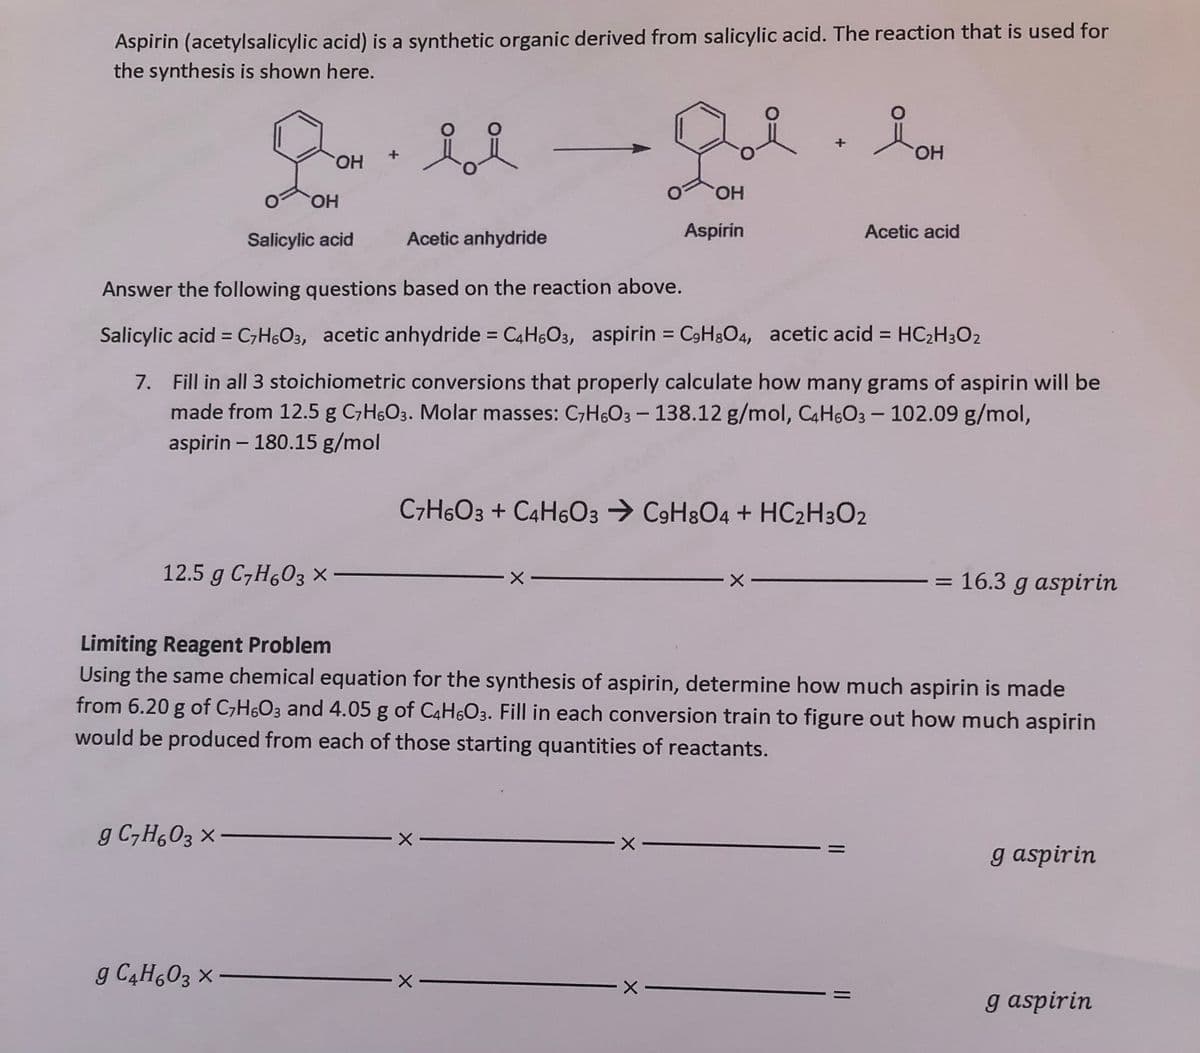 Aspirin (acetylsalicylic acid) is a synthetic organic derived from salicylic acid. The reaction that is used for
the synthesis is shown here.
HO.
HO,
HO.
HO,
Salicylic acid
Acetic anhydride
Aspirin
Acetic acid
Answer the following questions based on the reaction above.
Salicylic acid = C;H6O3, acetic anhydride = C4H603, aspirin = C9H3O4, acetic acid =
HC2H3O2
%3D
%3D
%3D
7. Fill in all 3 stoichiometric conversions that properly calculate how many grams of aspirin willI be
made from 12.5 g C,H6O3. Molar masses: C,H6O3 - 138.12 g/mol, C4H6O3 - 102.09 g/mol,
aspirin – 180.15 g/mol
C7H6O3 + C4H6O3 → C9H8O4 + HC2H3O2
12.5 g C7H603 x-
16.3 g aspirin
Limiting Reagent Problem
Using the same chemical equation for the synthesis of aspirin, determine how much aspirin is made
from 6.20 g of C;H6O3 and 4.05 g of C4H6O3. Fill in each conversion train to figure out how much aspirin
would be produced from each of those starting quantities of reactants.
g C,H,03 ×
g aspirin
g C4H603 x
g aspirin
